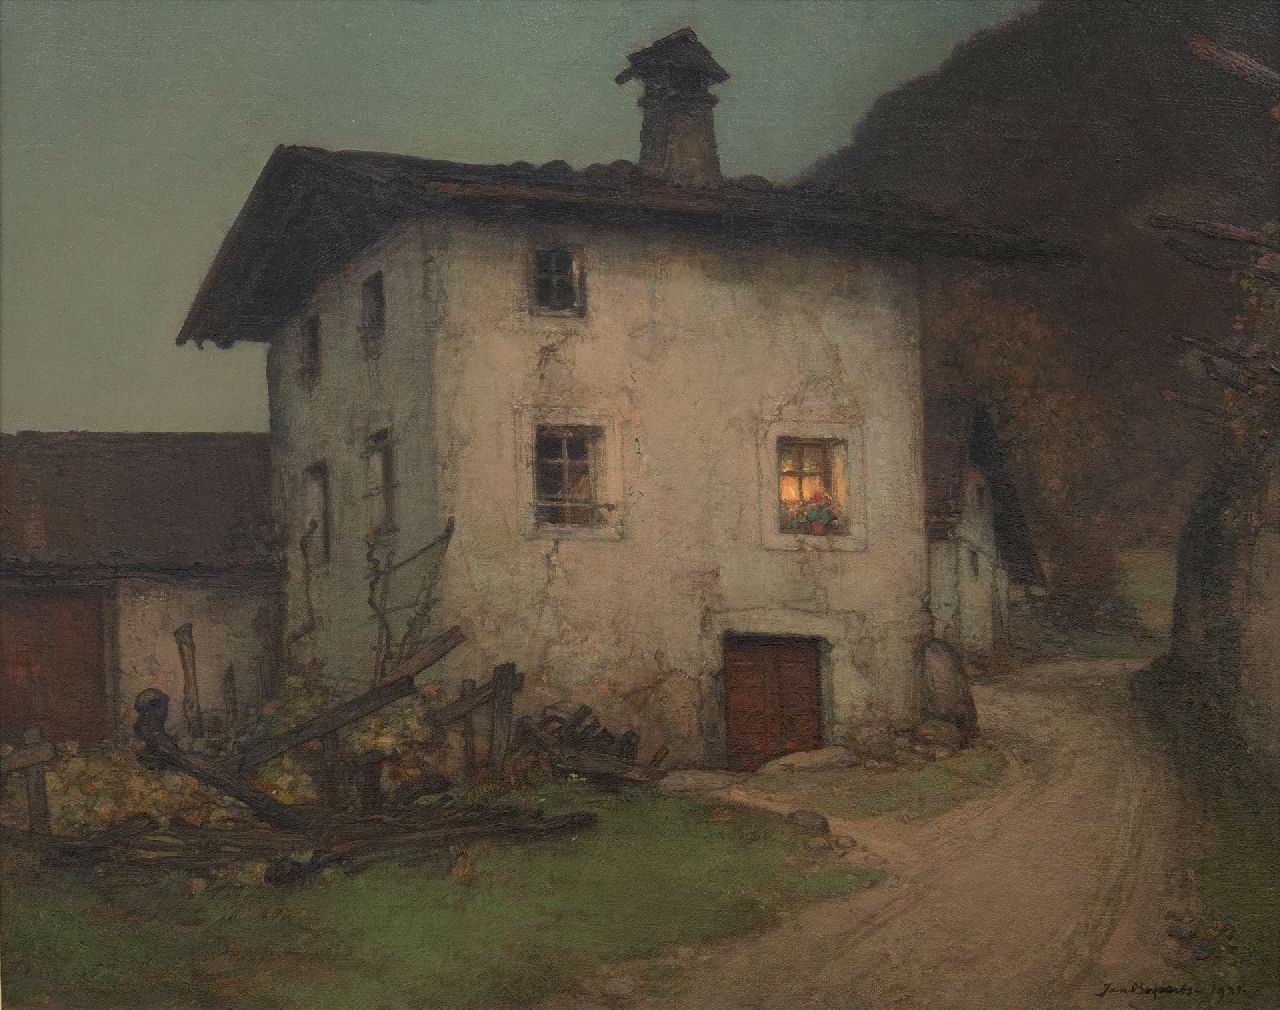 Bogaerts J.J.M.  | Johannes Jacobus Maria 'Jan' Bogaerts | Paintings offered for sale | Eveningh twilight in Mategna near Merano, oil on canvas 40.5 x 50.6 cm, signed l.r. and dated 1931